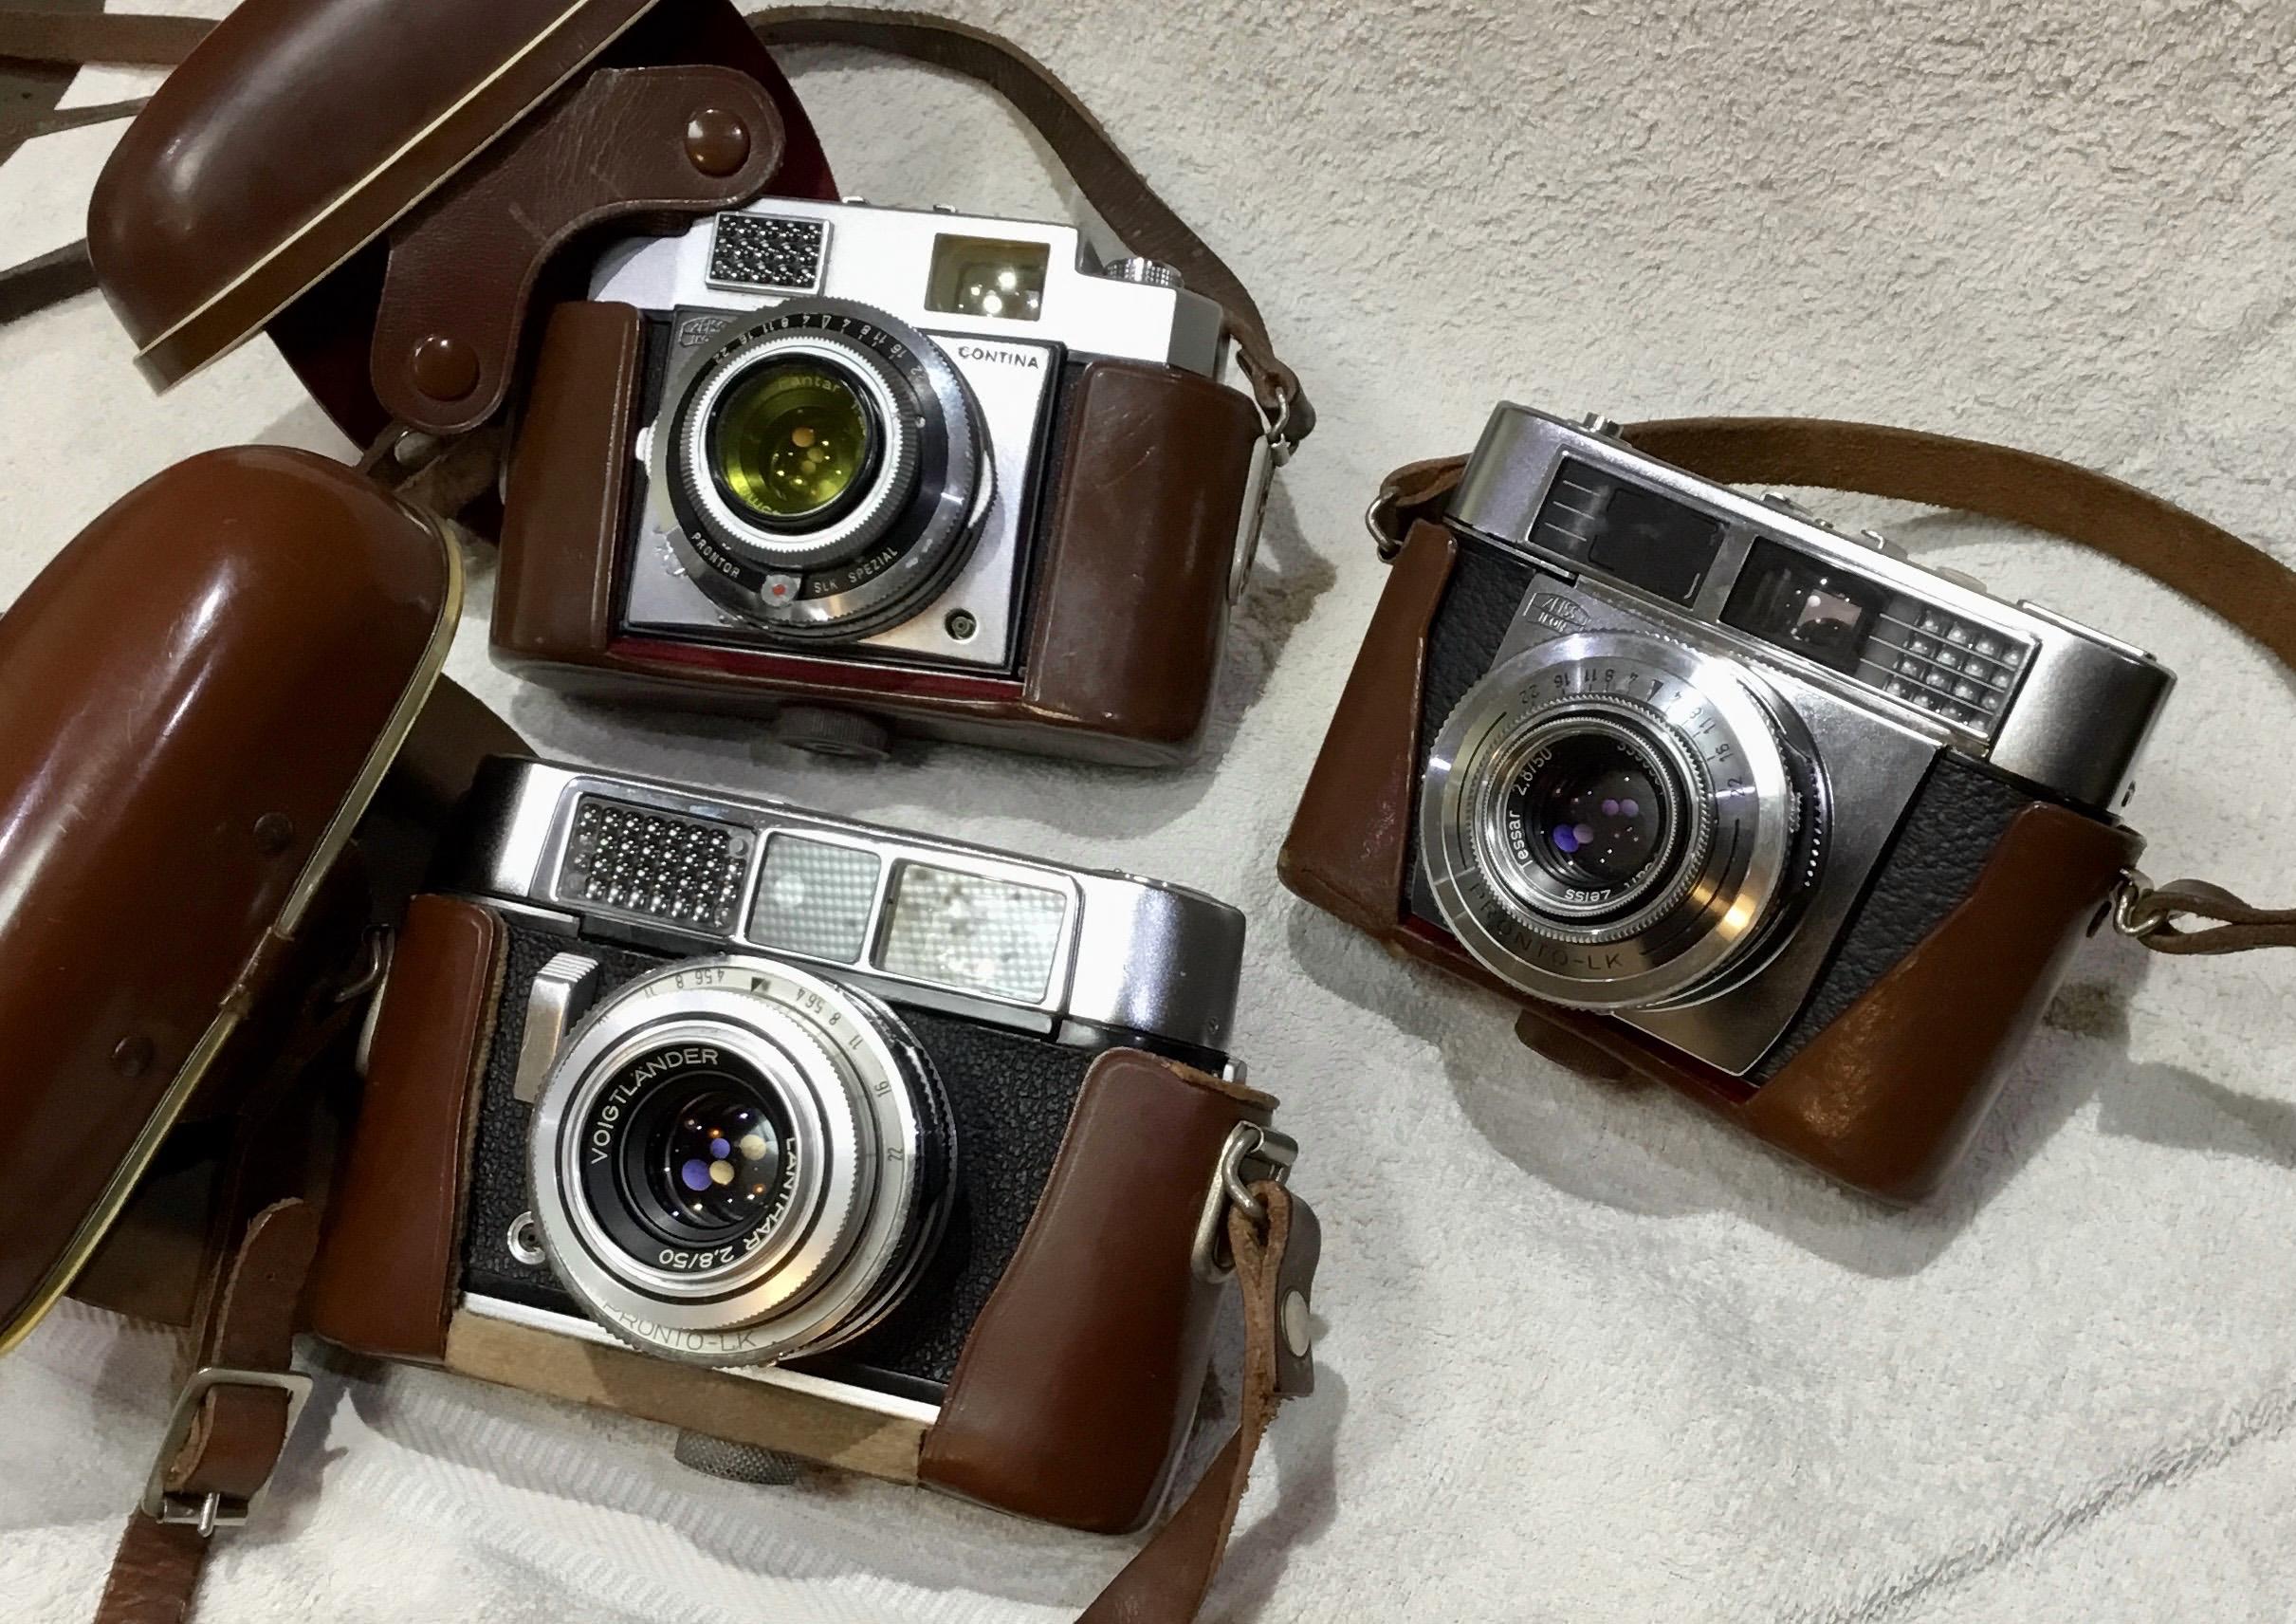 Zeiss and Voigtänder fossils. A good feeling to hold and play with them after many years of neglect, although always carefully stored. And joy oh joy, no batteries needed!